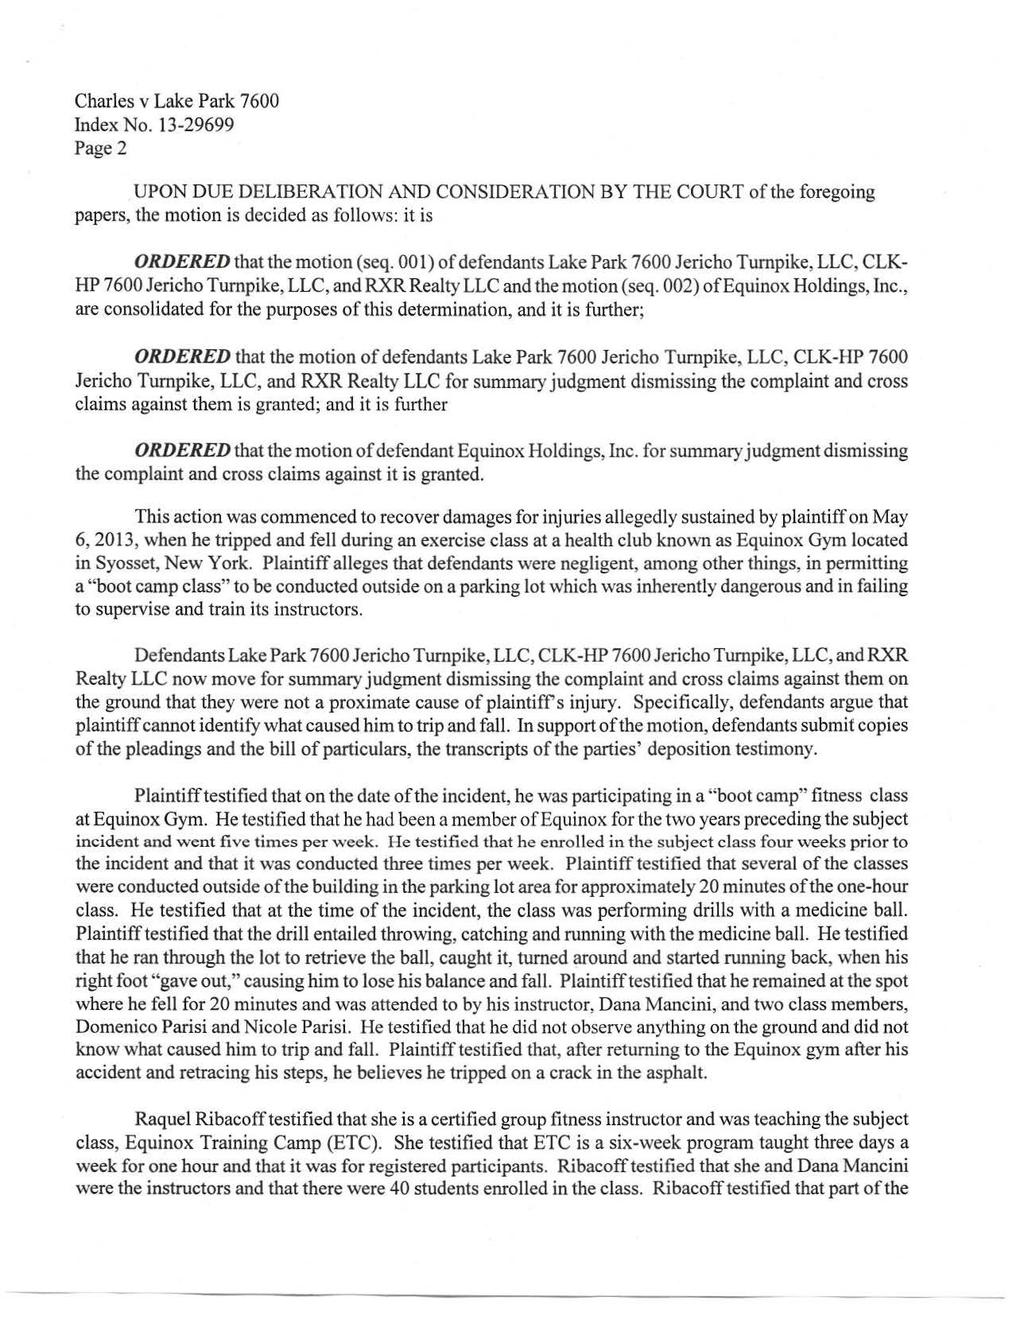 [* 2] Page2 UPON DUE DELIBERATION AND CONSIDERATION BY THE COURT of the foregoing papers, the motion is decided as follows: it is ORDERED that the motion (seq.